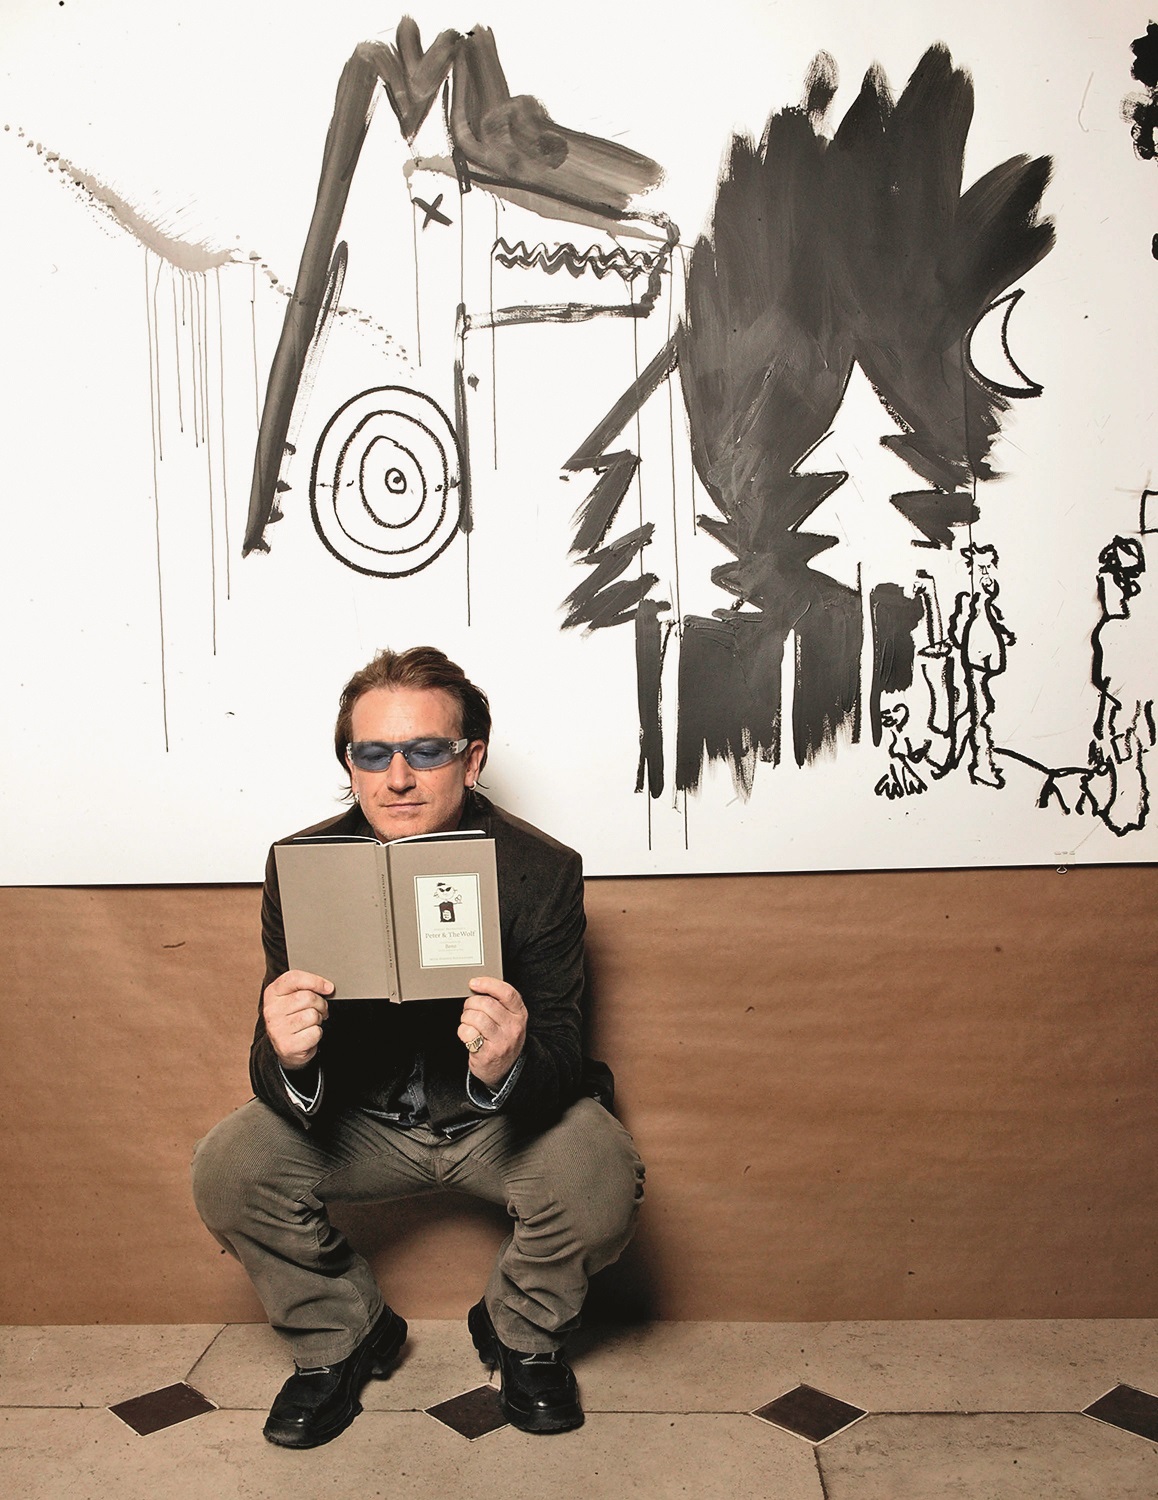 DUBLIN, IRELAND - OCTOBER 3: Singer Bono stands in front of an illustration at the book launch for 